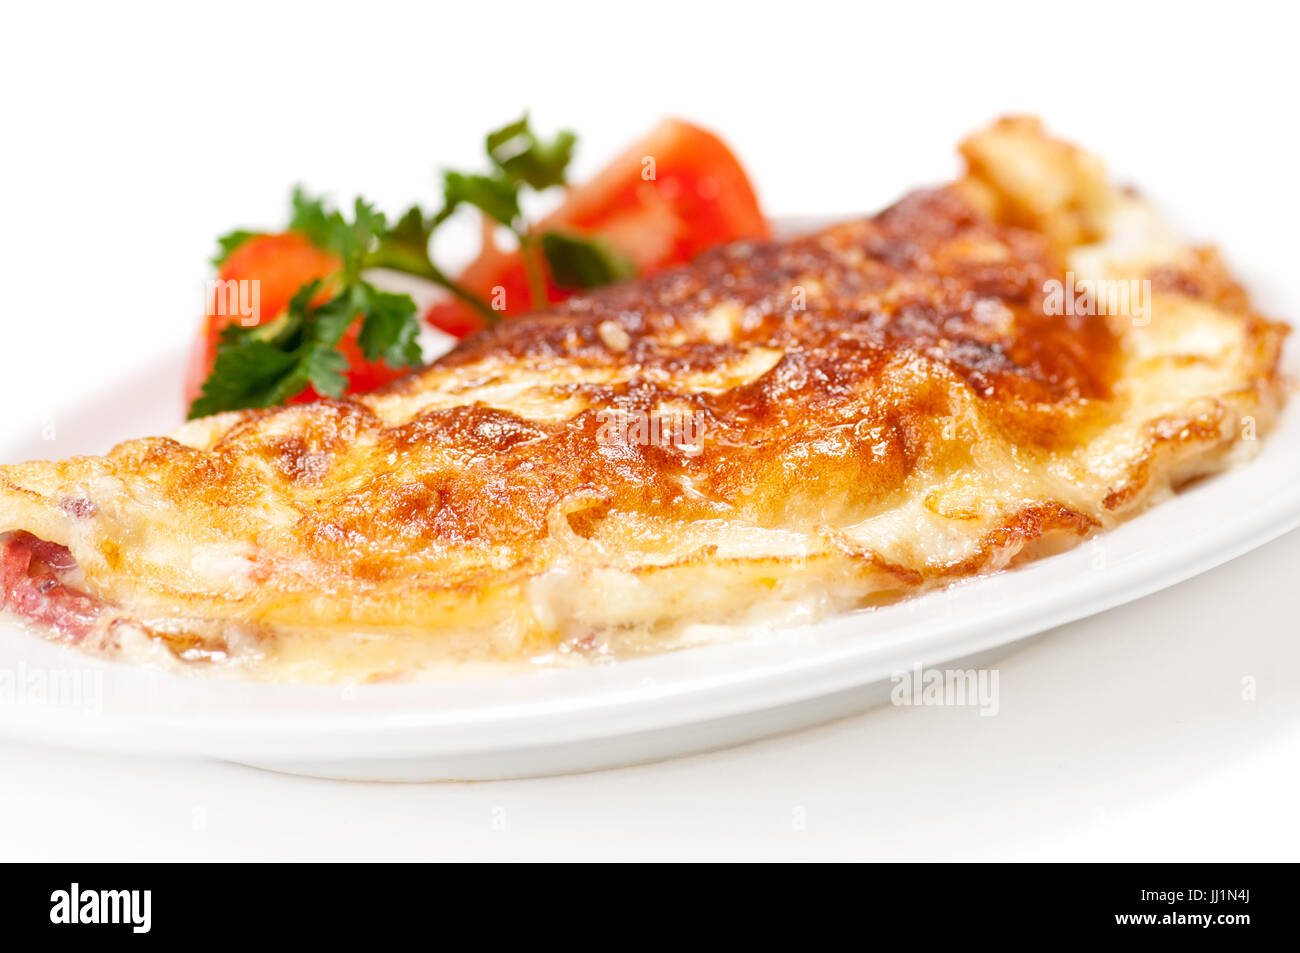 Omelet with herbs and tomatoes Stock Photo